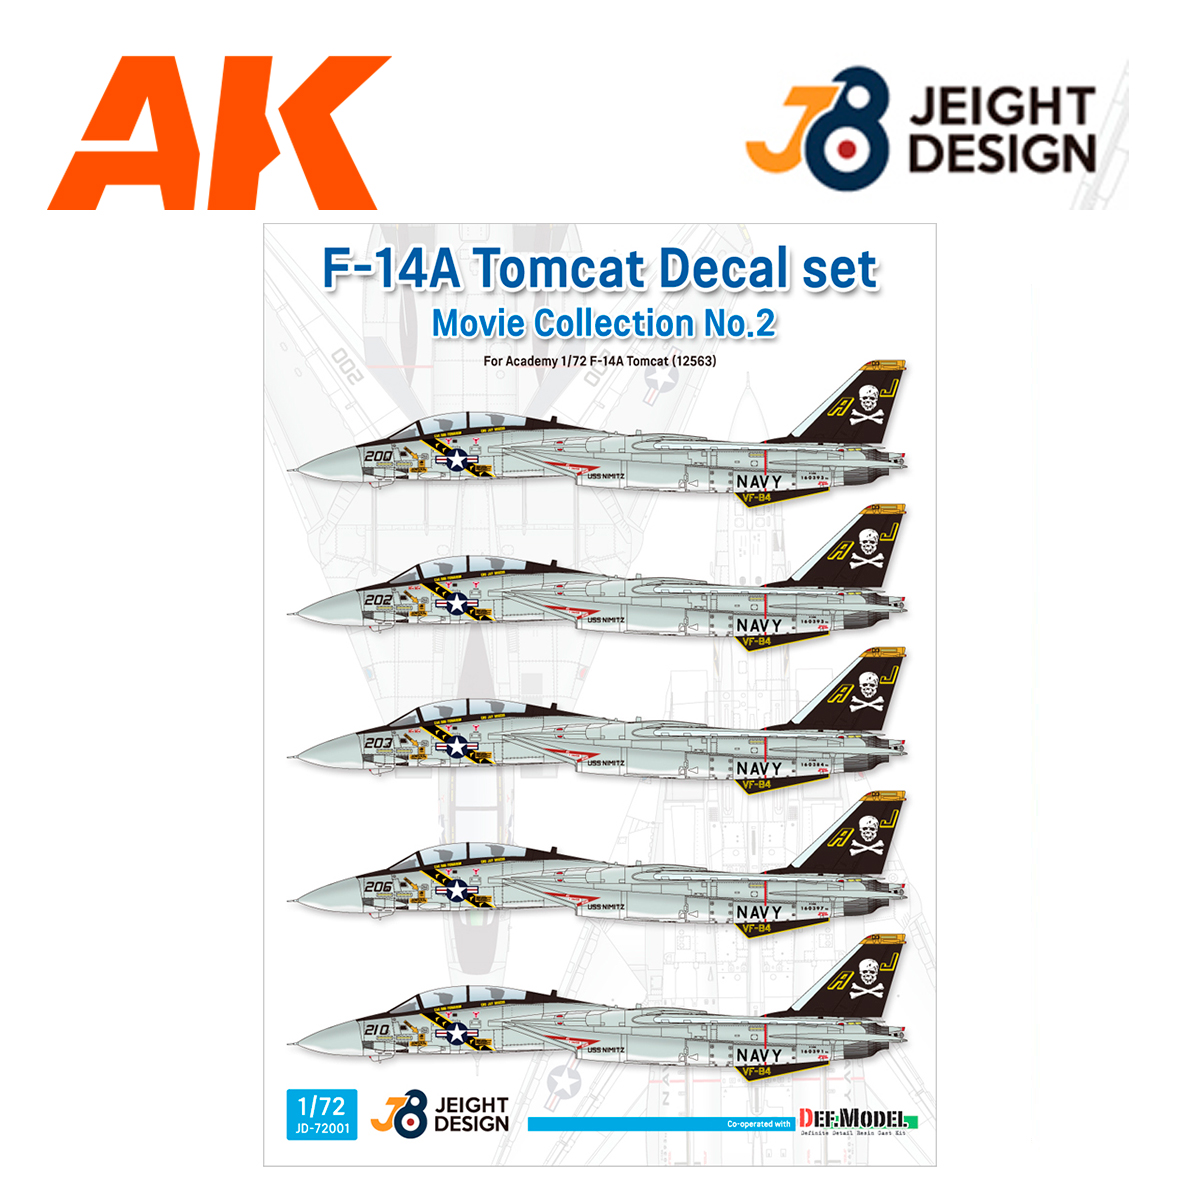 F-14A Tomcat Decal set – Movie Collection No.2